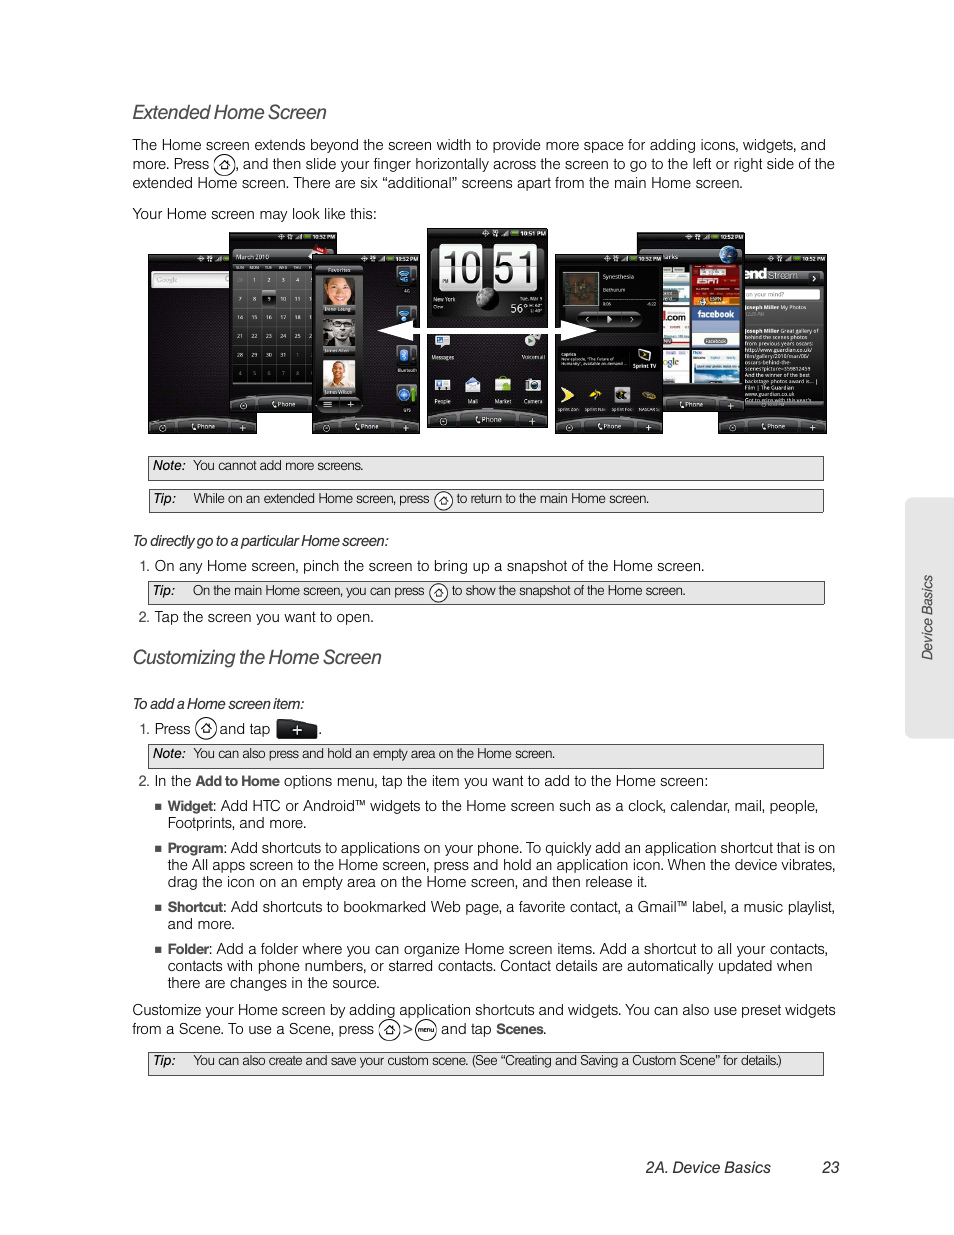 Extended home screen, Customizing the home screen | HTC EVO 4G User Manual | Page 33 / 197